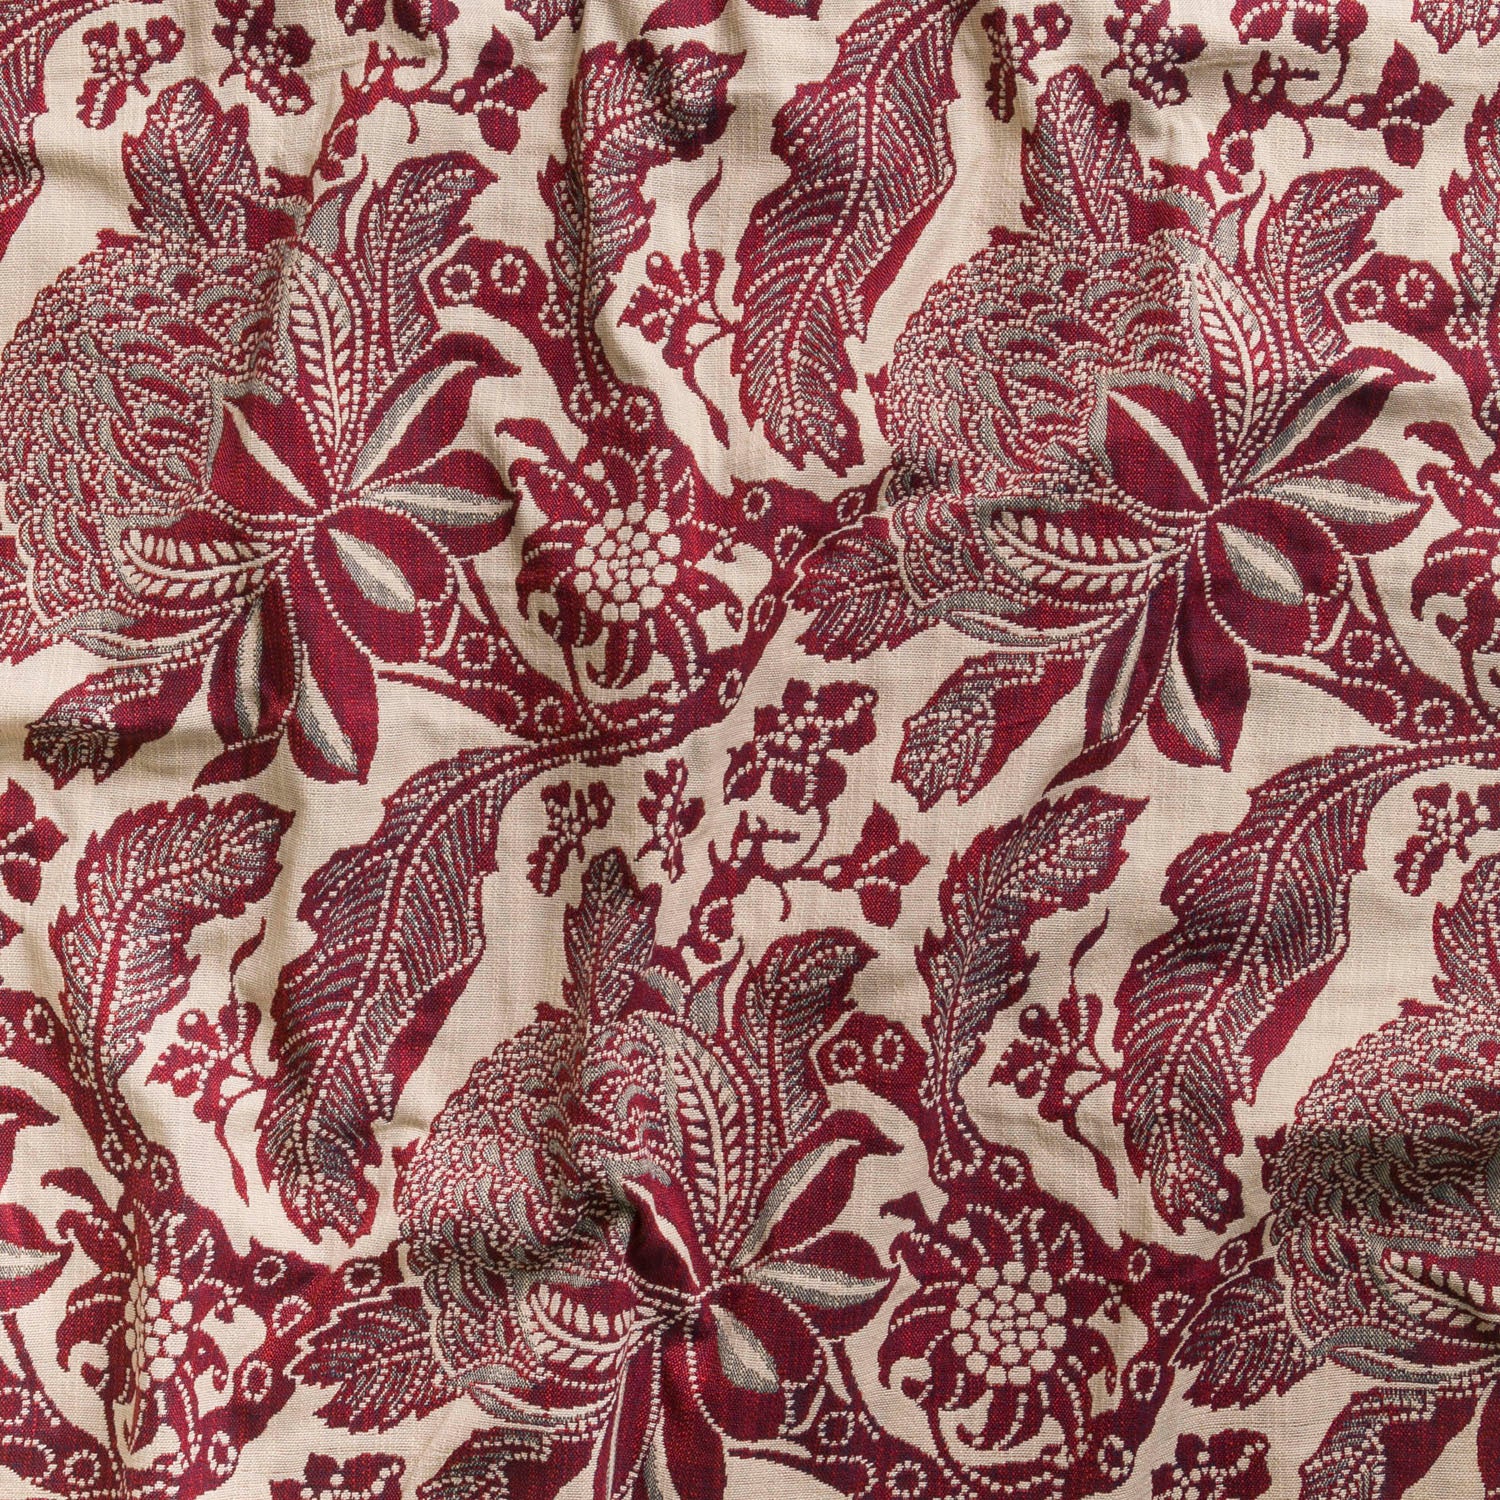 Detail of wallpaper in a repeating botanical print in maroon and gray on a cream field.